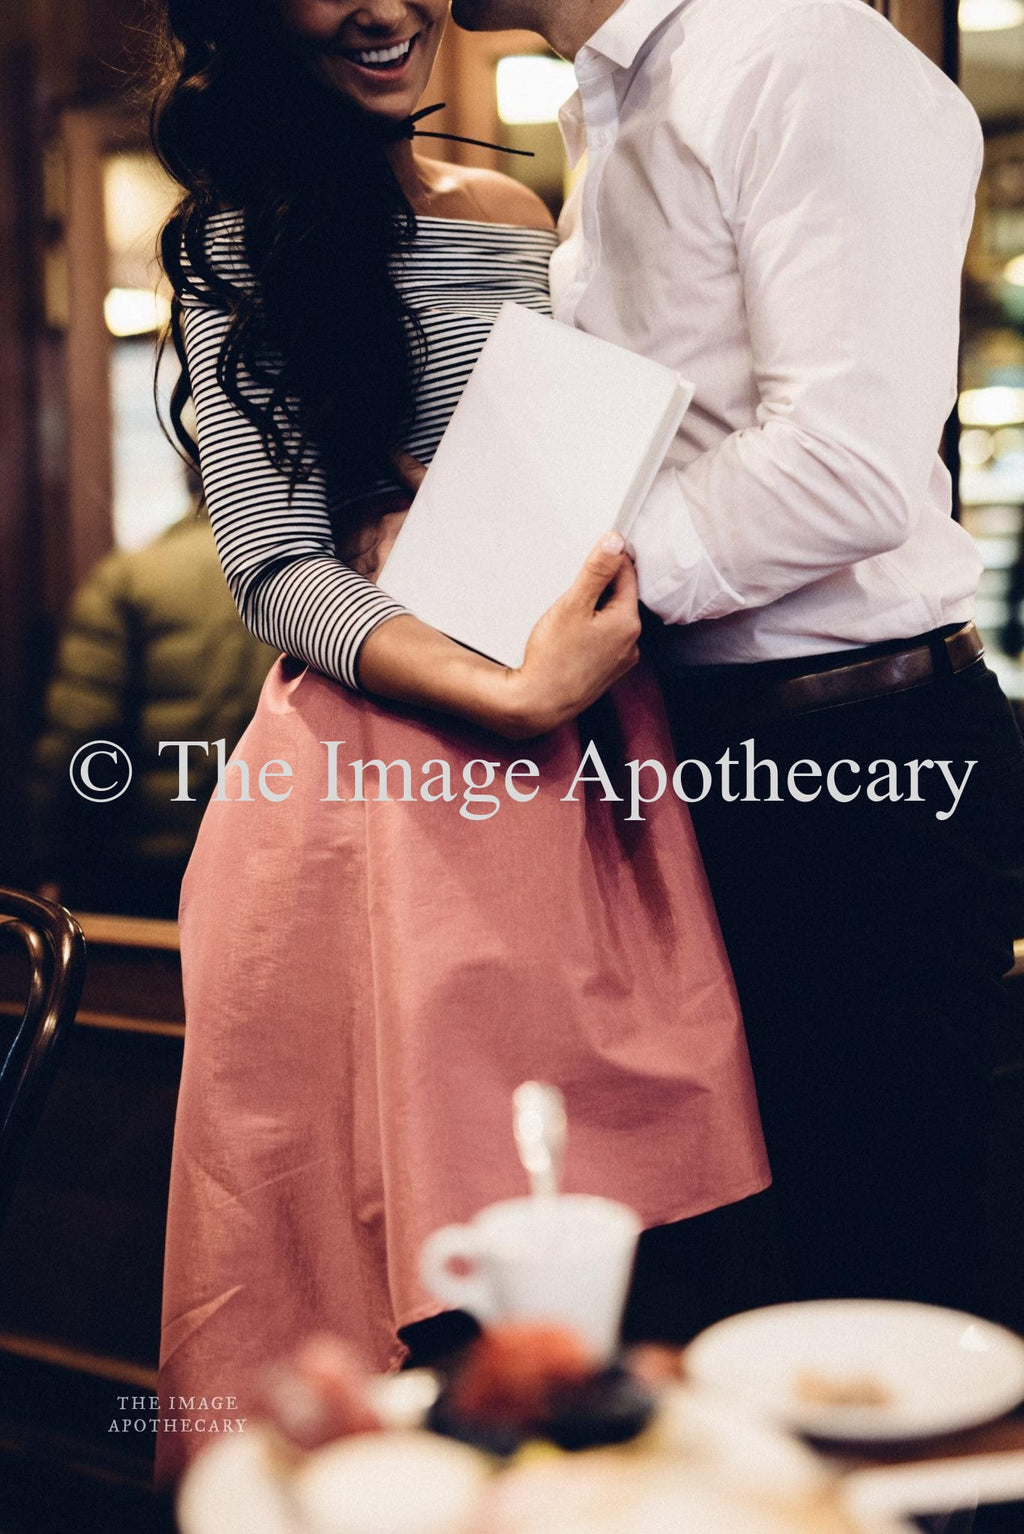 TheImageApothecary-354M - Stock Photography by The Image Apothecary